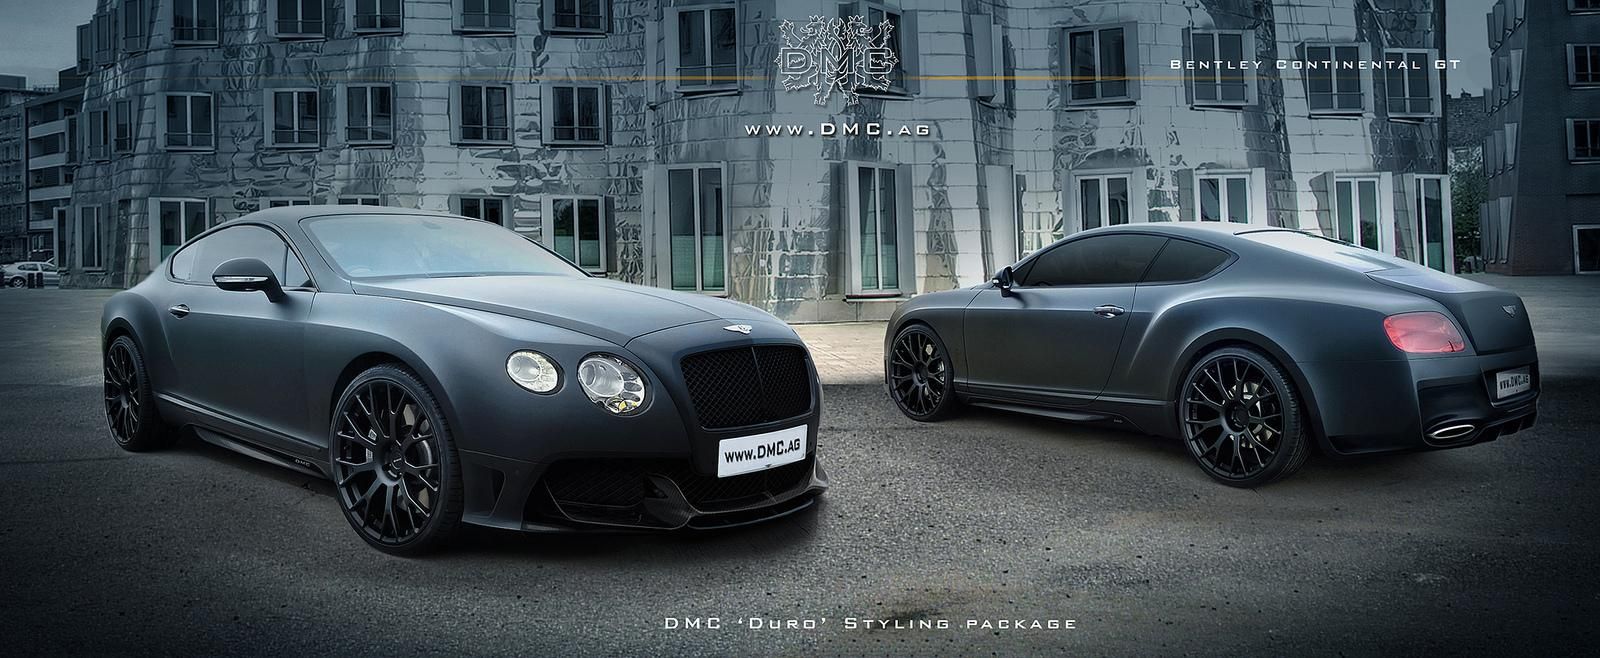 2013 Bentley Continental GT DURO China Edition by DMC